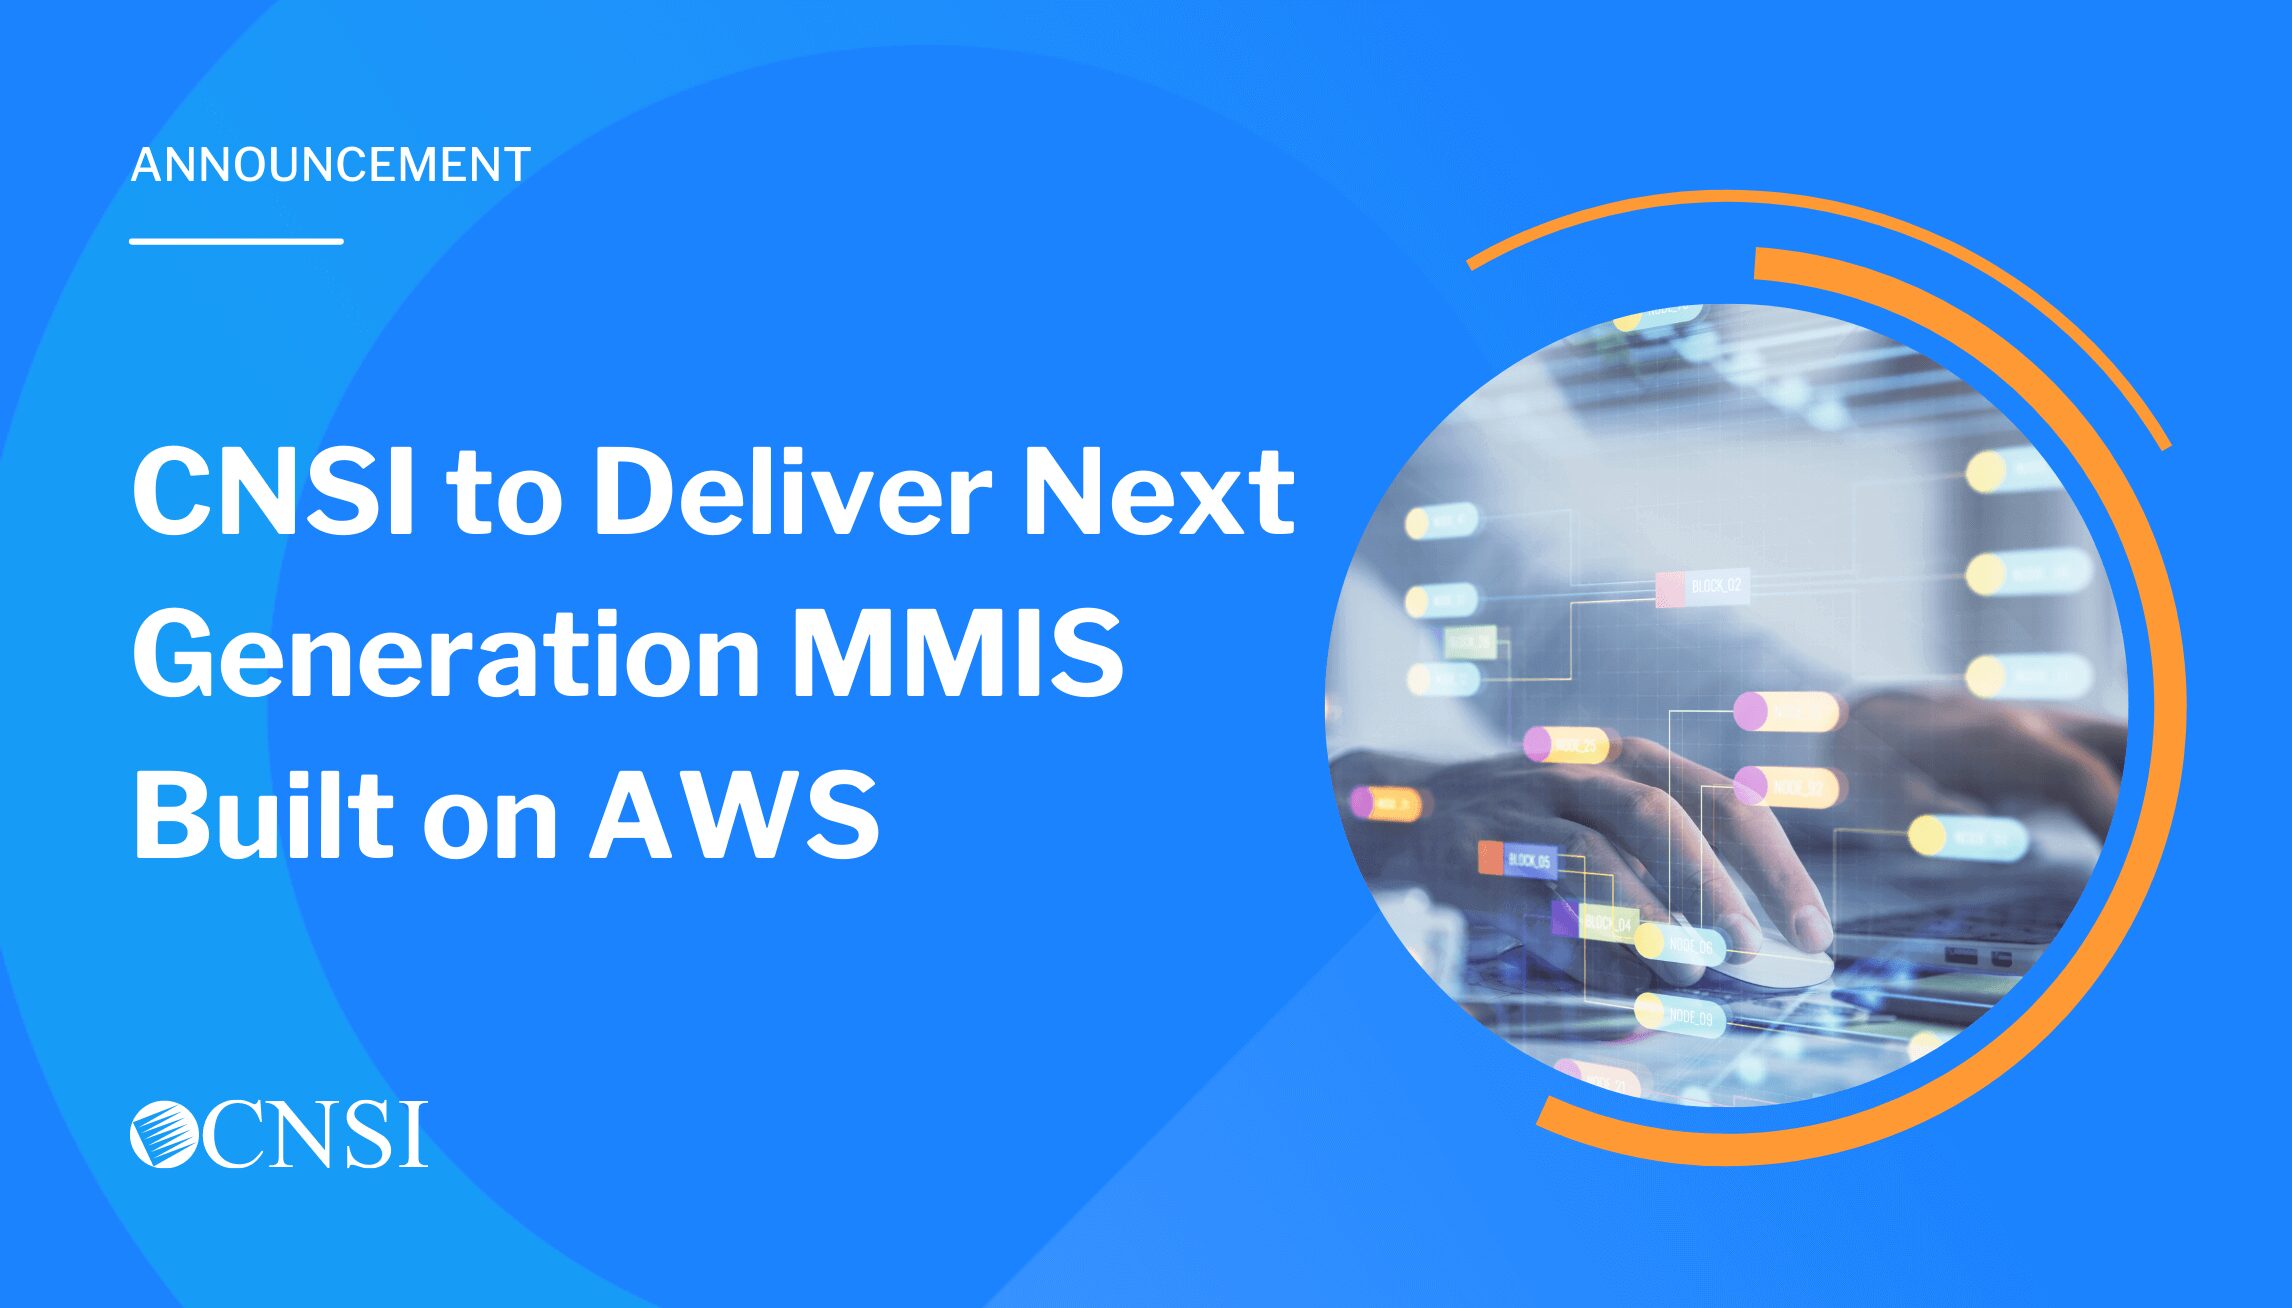 CNSI to Deliver Next Generation MMIS Built on AWS